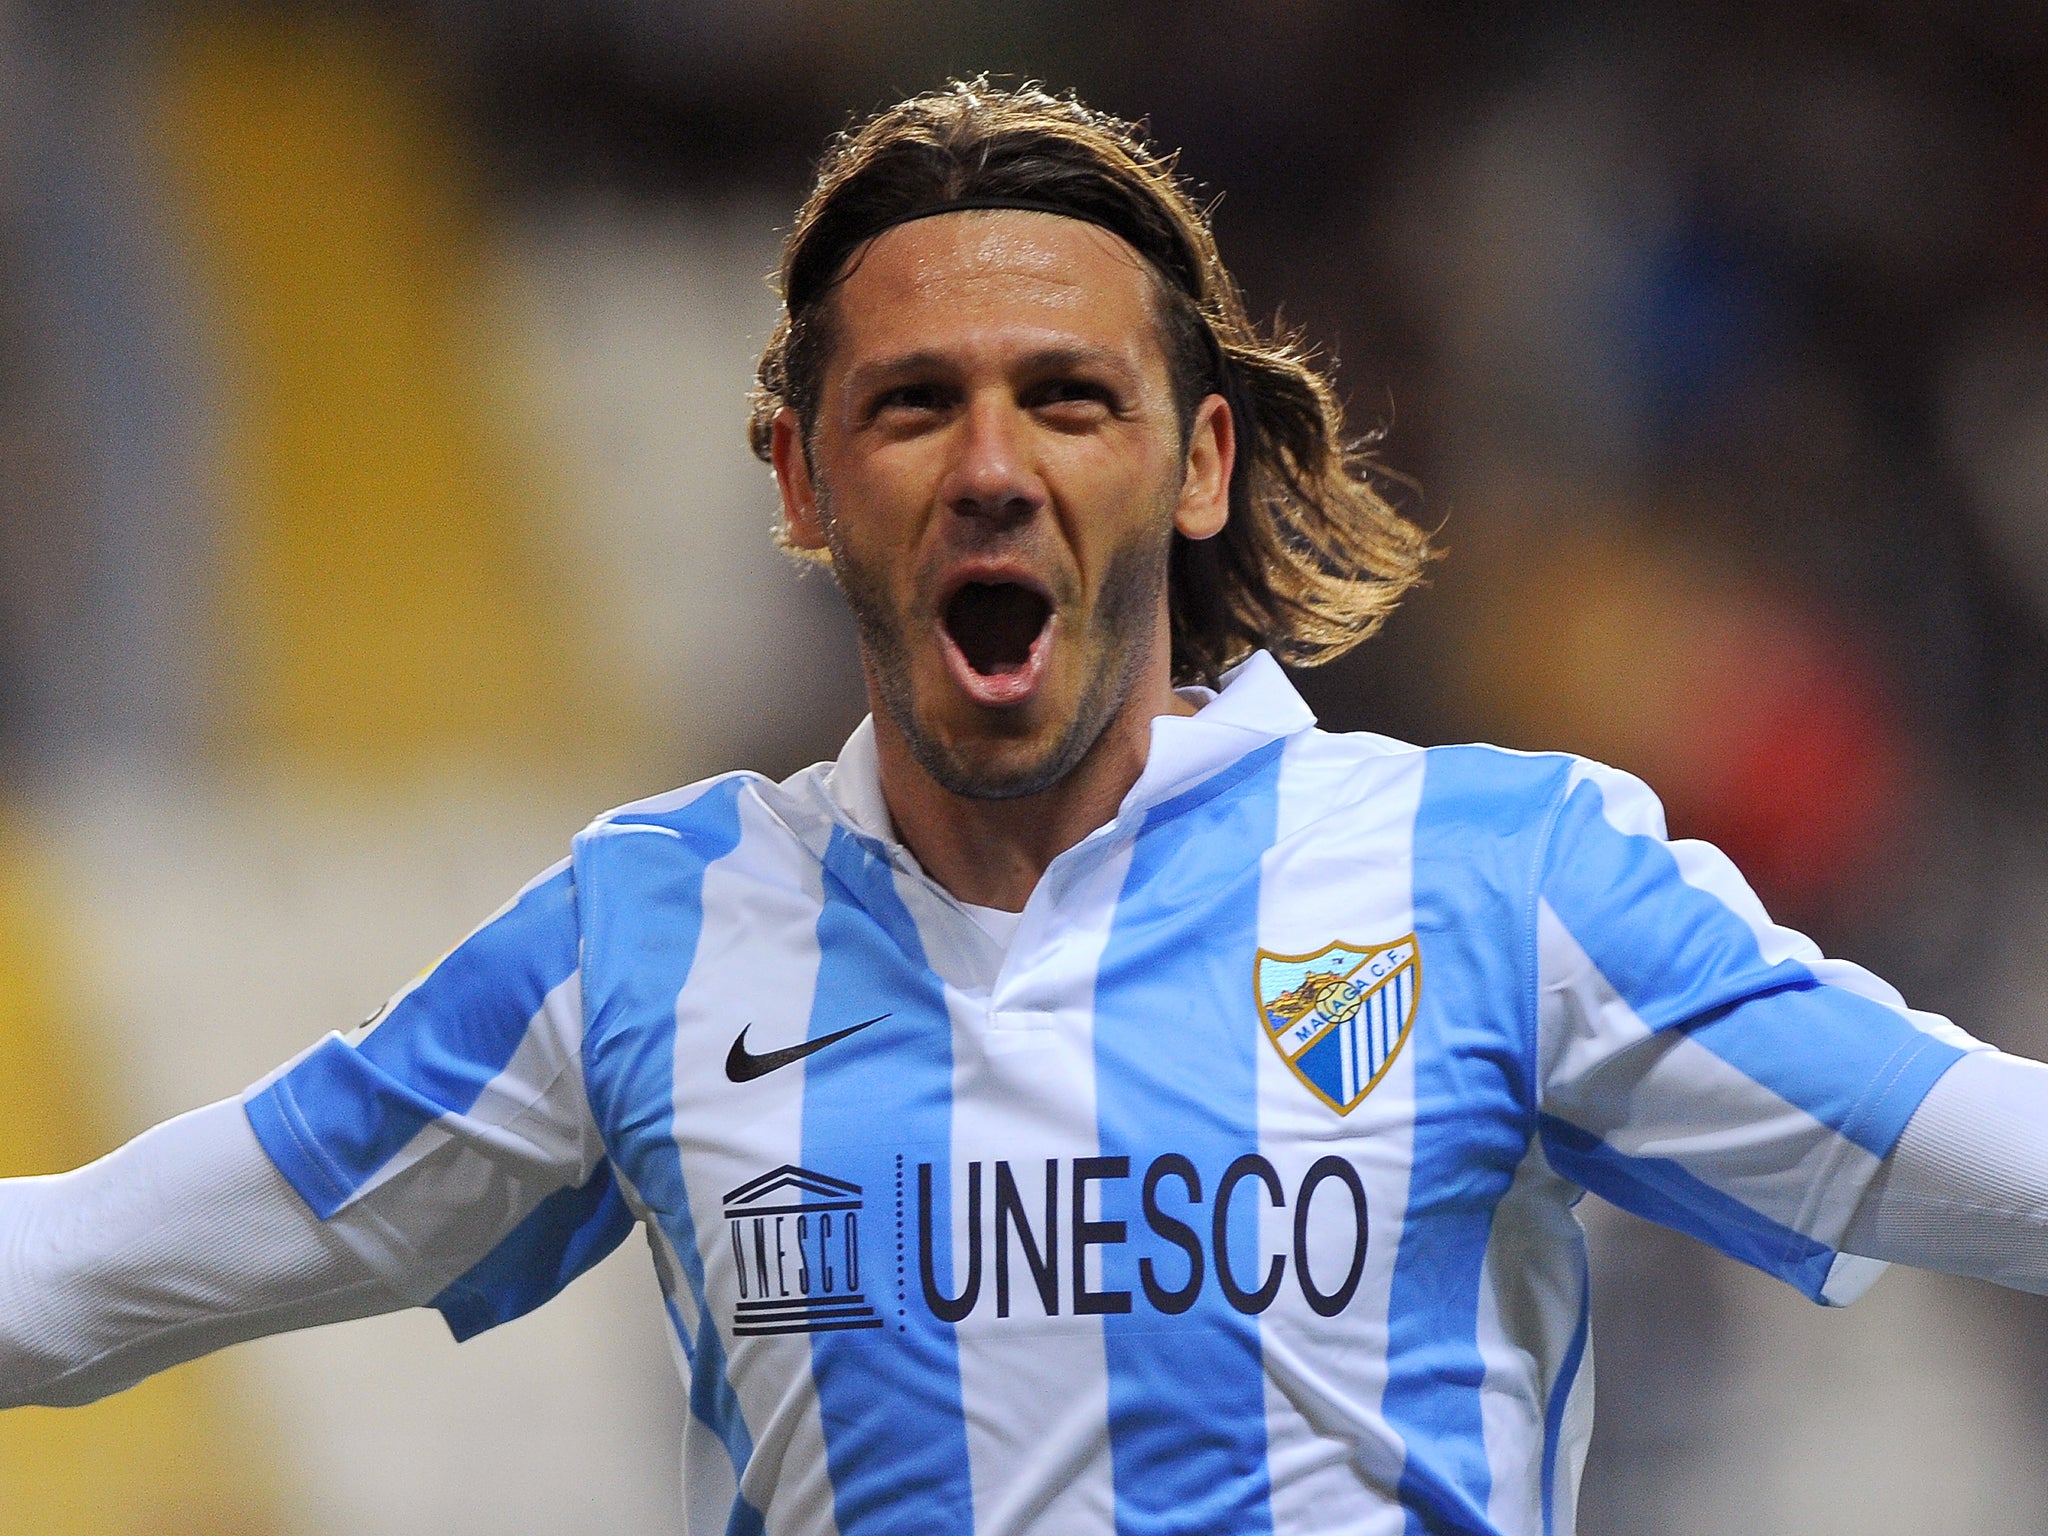 Martin Demichelis in action for Malaga